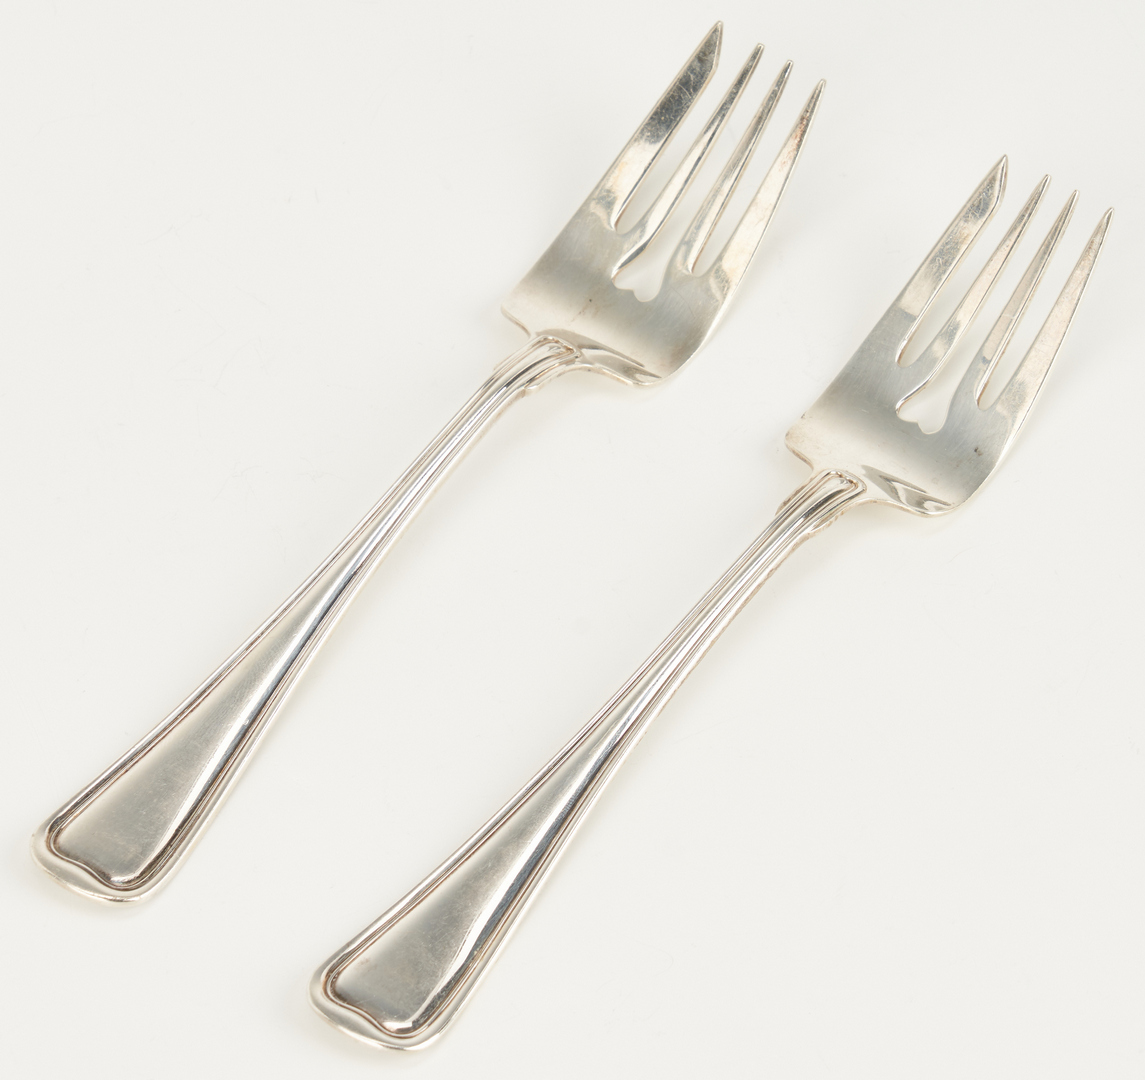 Lot 800: Gorham Sterling Silver Old French Flatware, 112 Pcs.